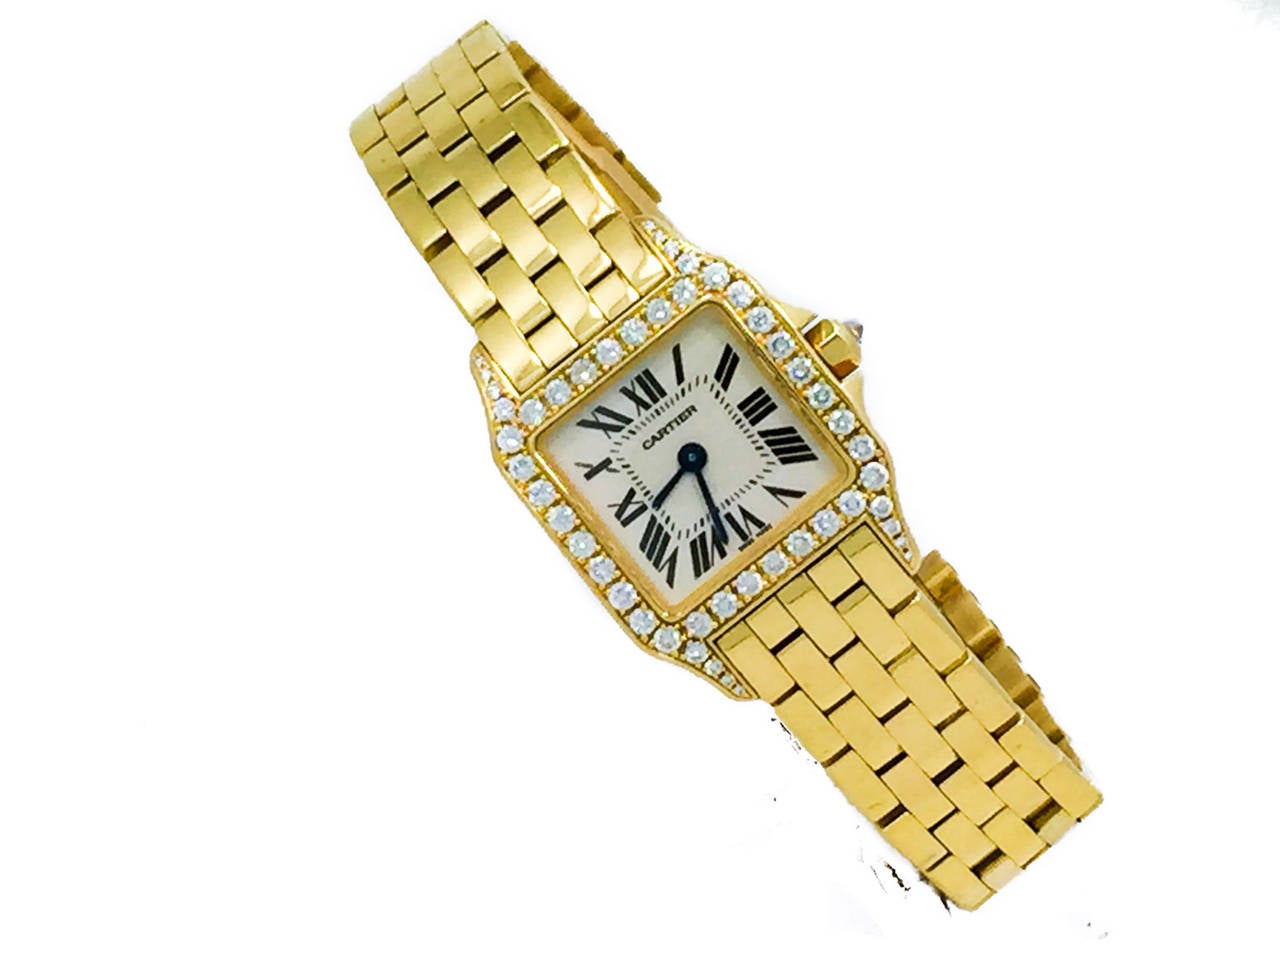 Cartier Ladies (21.5mm) Demoiselle in 18k Yellow Gold W/ Factory Diamond Bezel, Ref WF9001Y7, Retails $27,300. The Watch is in Excellent Condition & Keeping Perfect Time, Movement is Battery Operated. Included With the Watch are Its, Box, Manual,